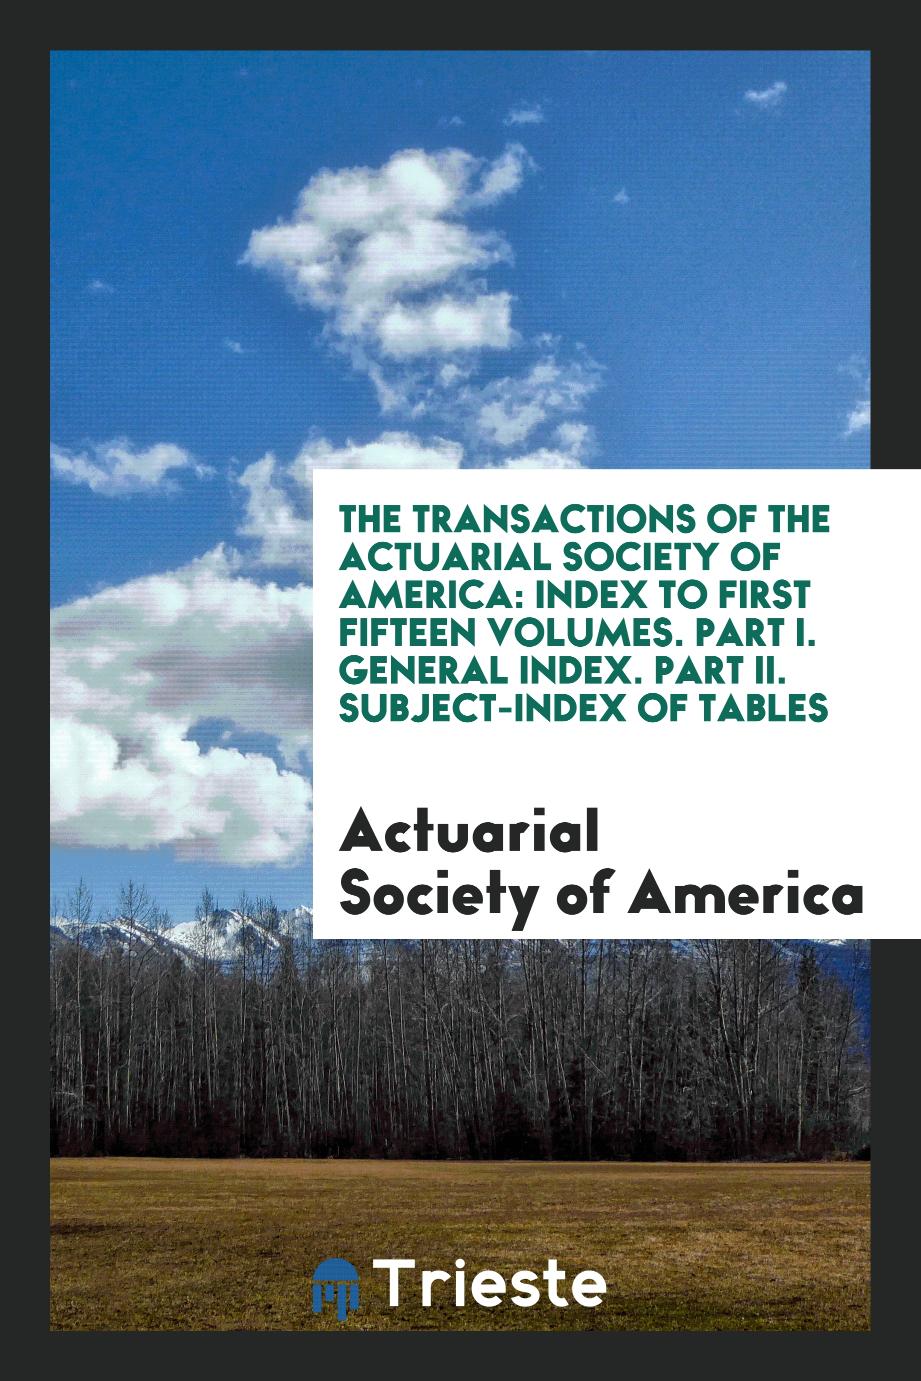 The Transactions of the Actuarial Society of America: Index to First Fifteen Volumes. Part I. General Index. Part II. Subject-Index of Tables